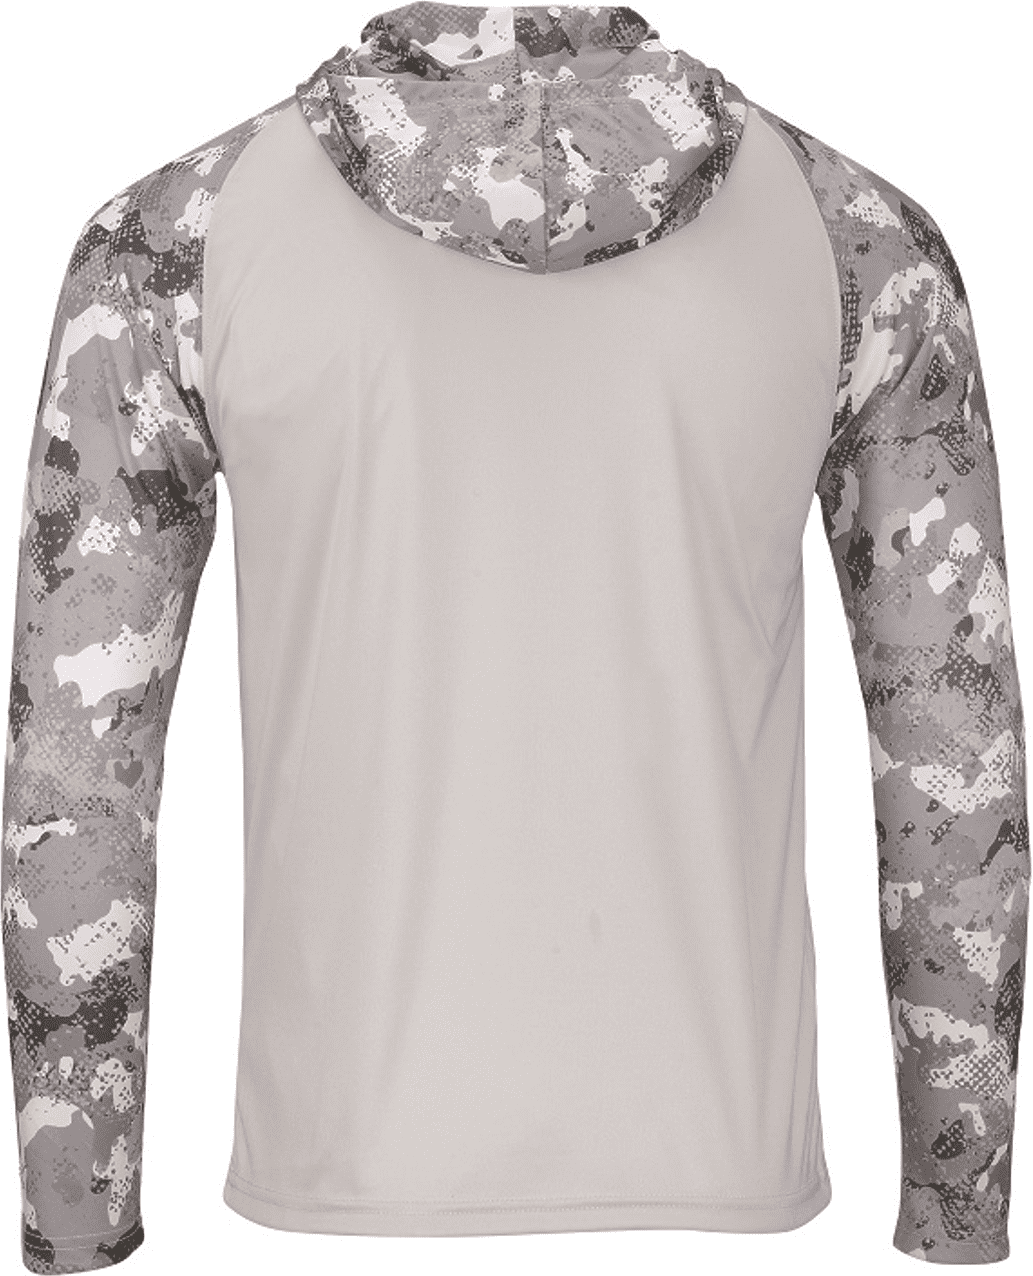 Paragon 240 Tortuga Extreme Performance Hooded T-Shirt - Aluminum - S